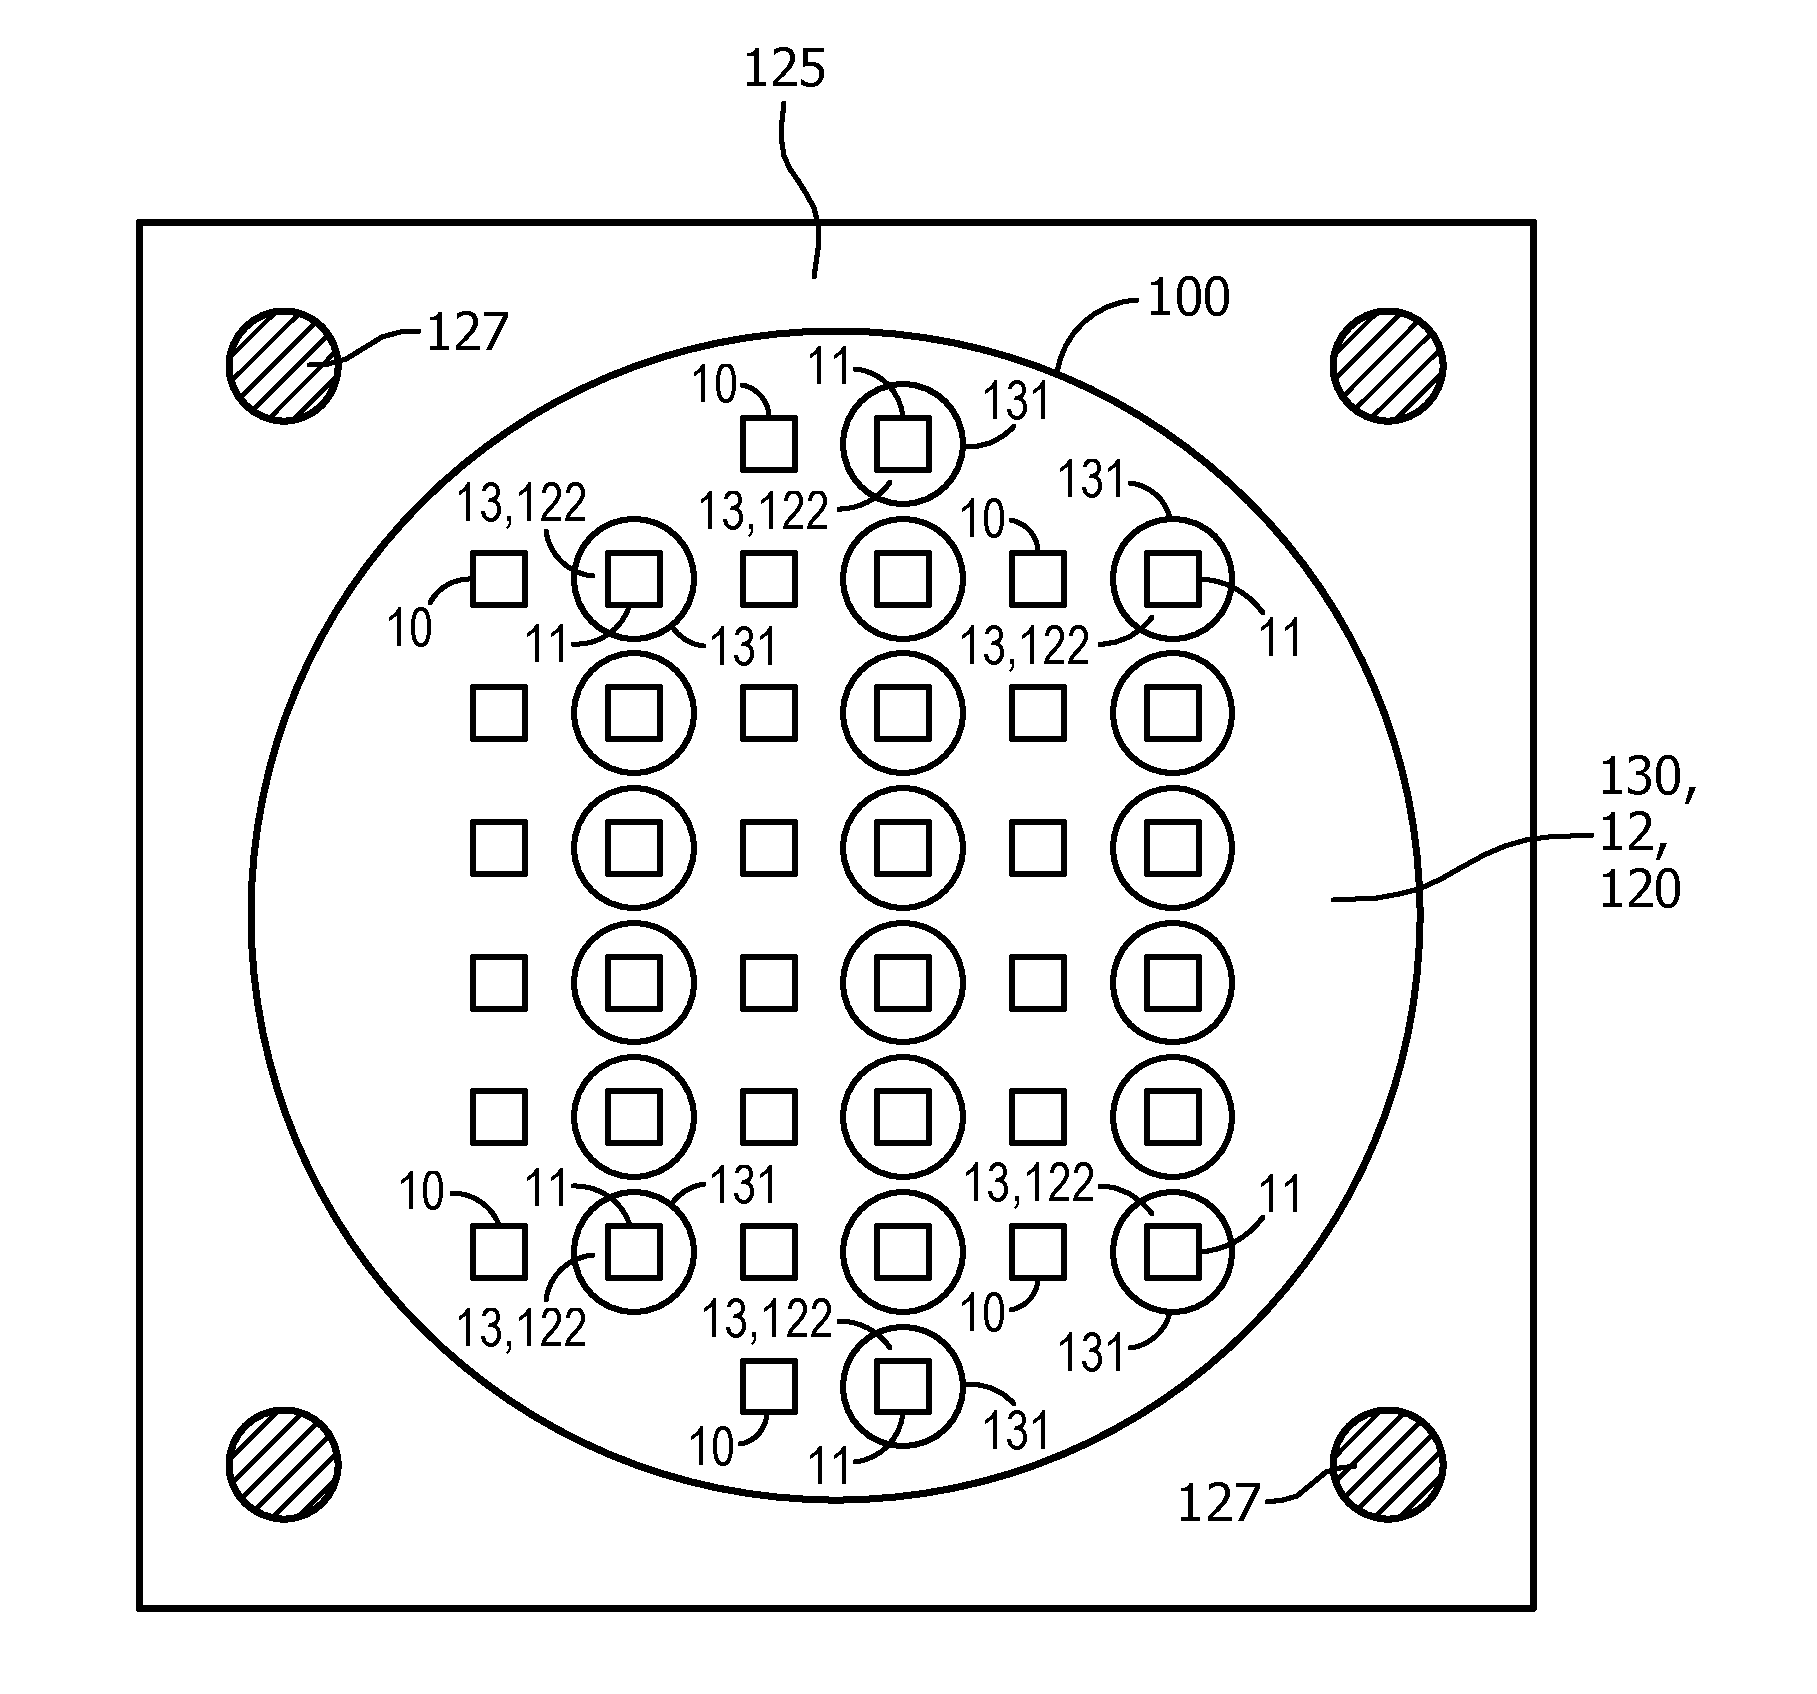 Lighting device comprising at least two sets of LEDs